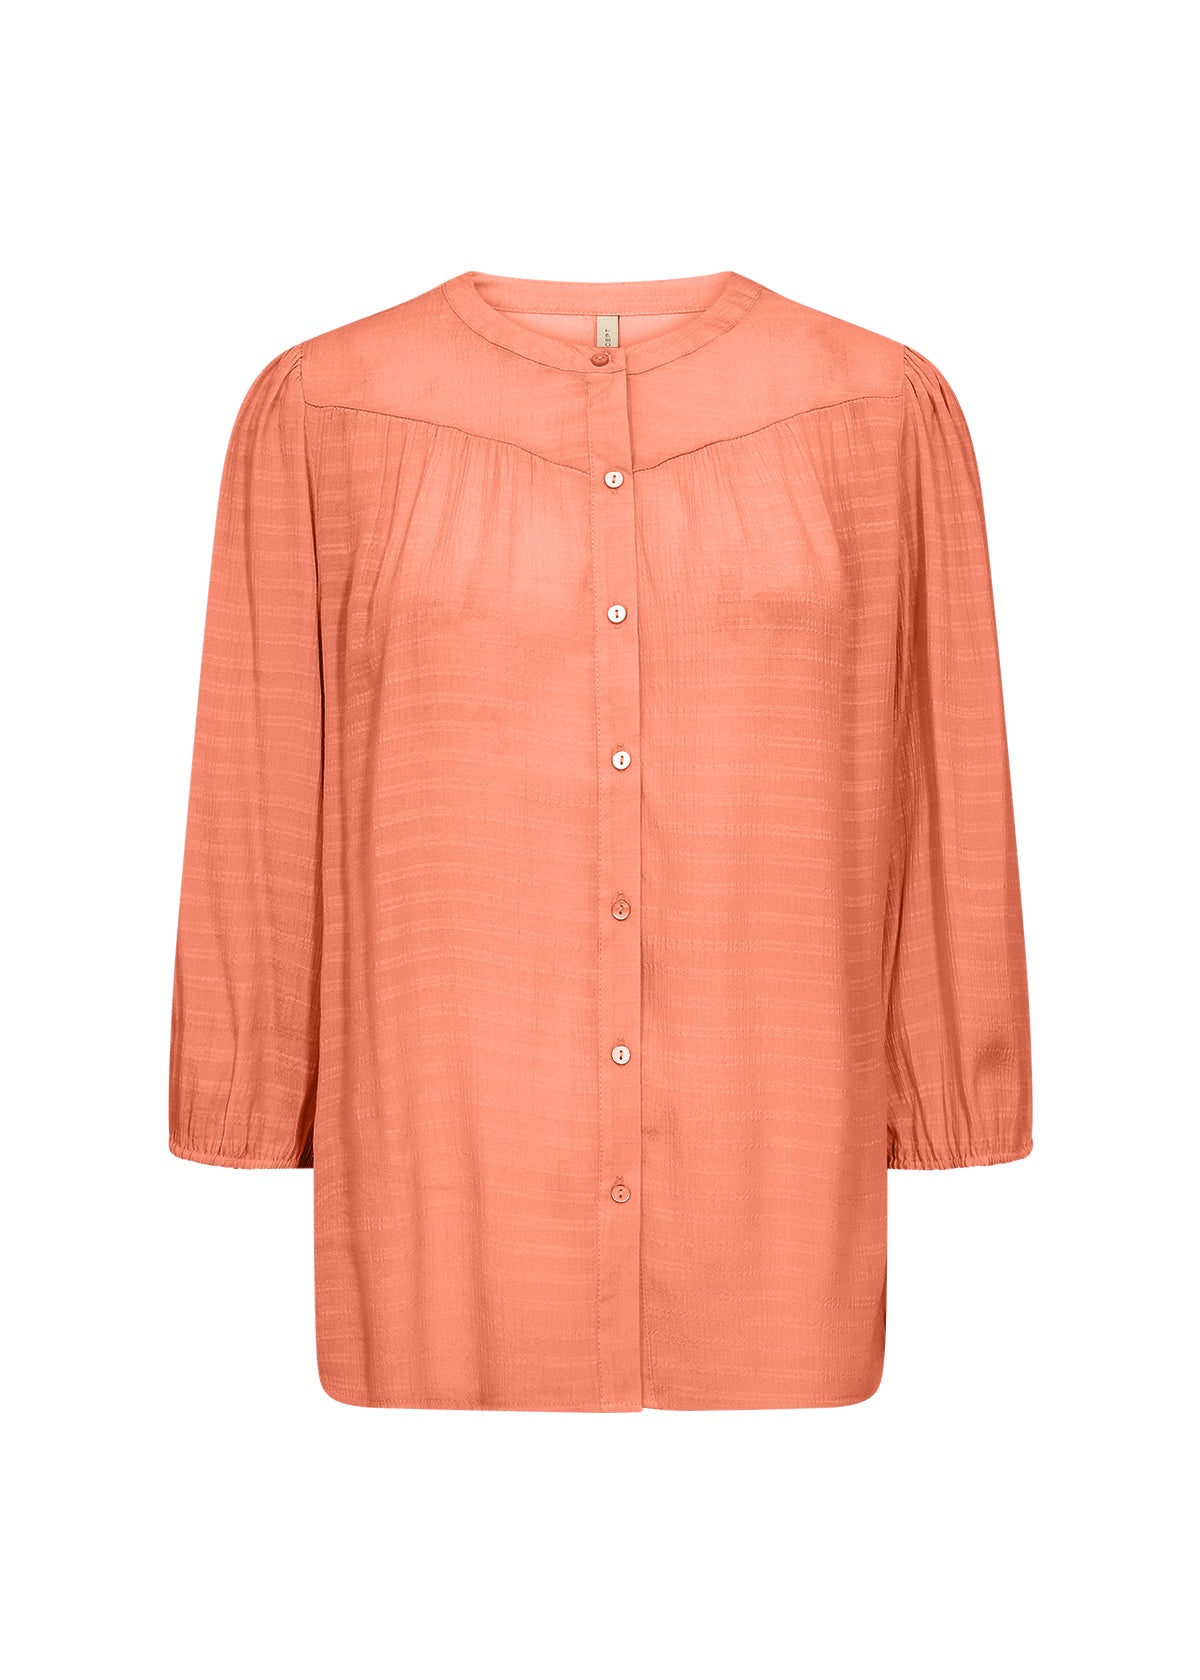 40595 DUSTY CLAY Soya Concept-Calypso 7 classic blouse